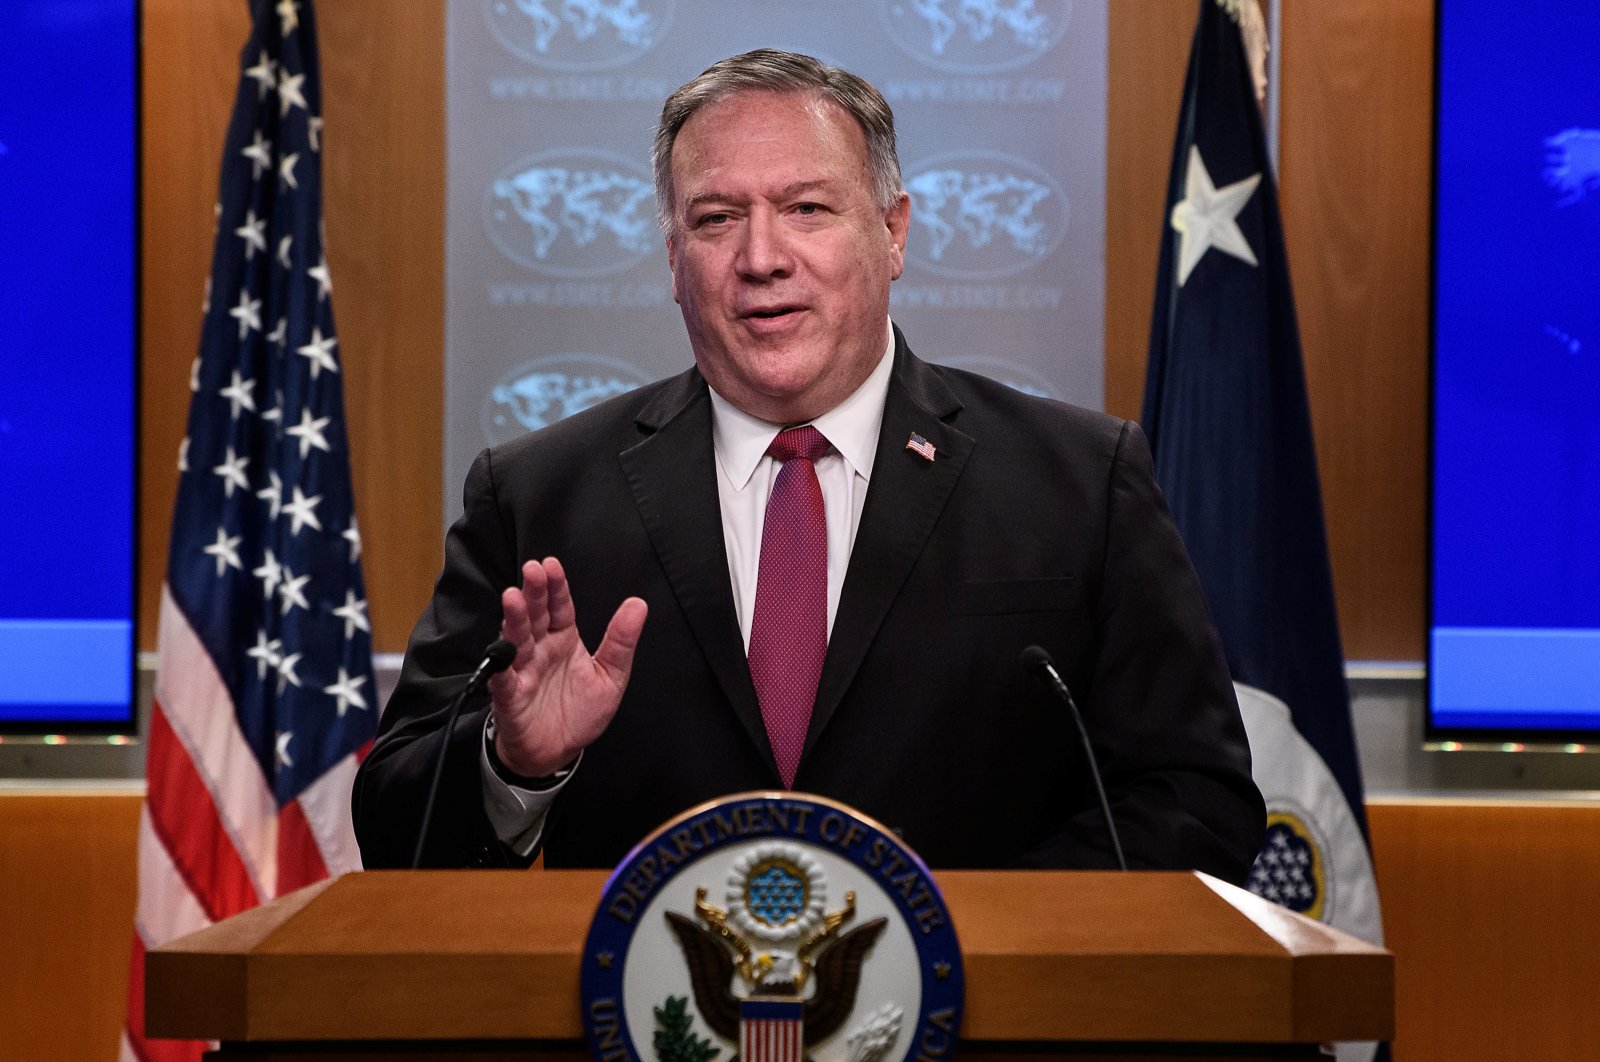 U.S. Secretary of State Mike Pompeo speaks at a news conference at the State Department in Washington, D.C., U.S. Oct. 21, 2020. (Reuters Photo)